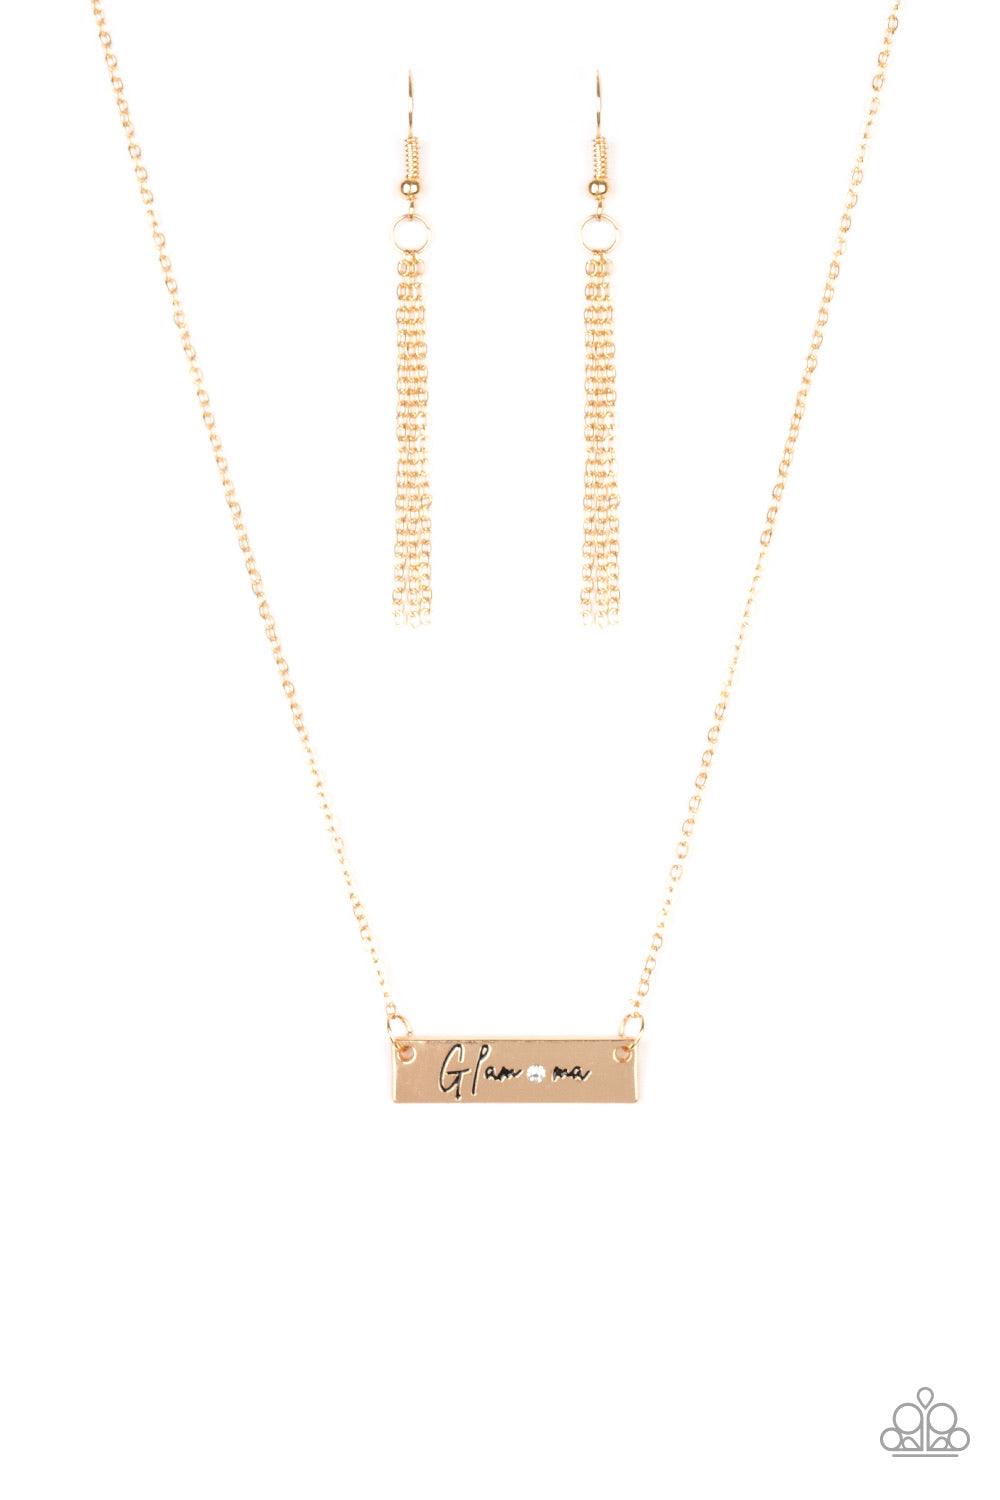 Paparazzi Accessories The GLAM-Ma - Gold Dotted with a dainty white rhinestone, a gold rectangular frame stamped in the sassy word, "Glam-ma", is suspended below the collar by a dainty gold chain for a glamorous look. Features an adjustable clasp closure.